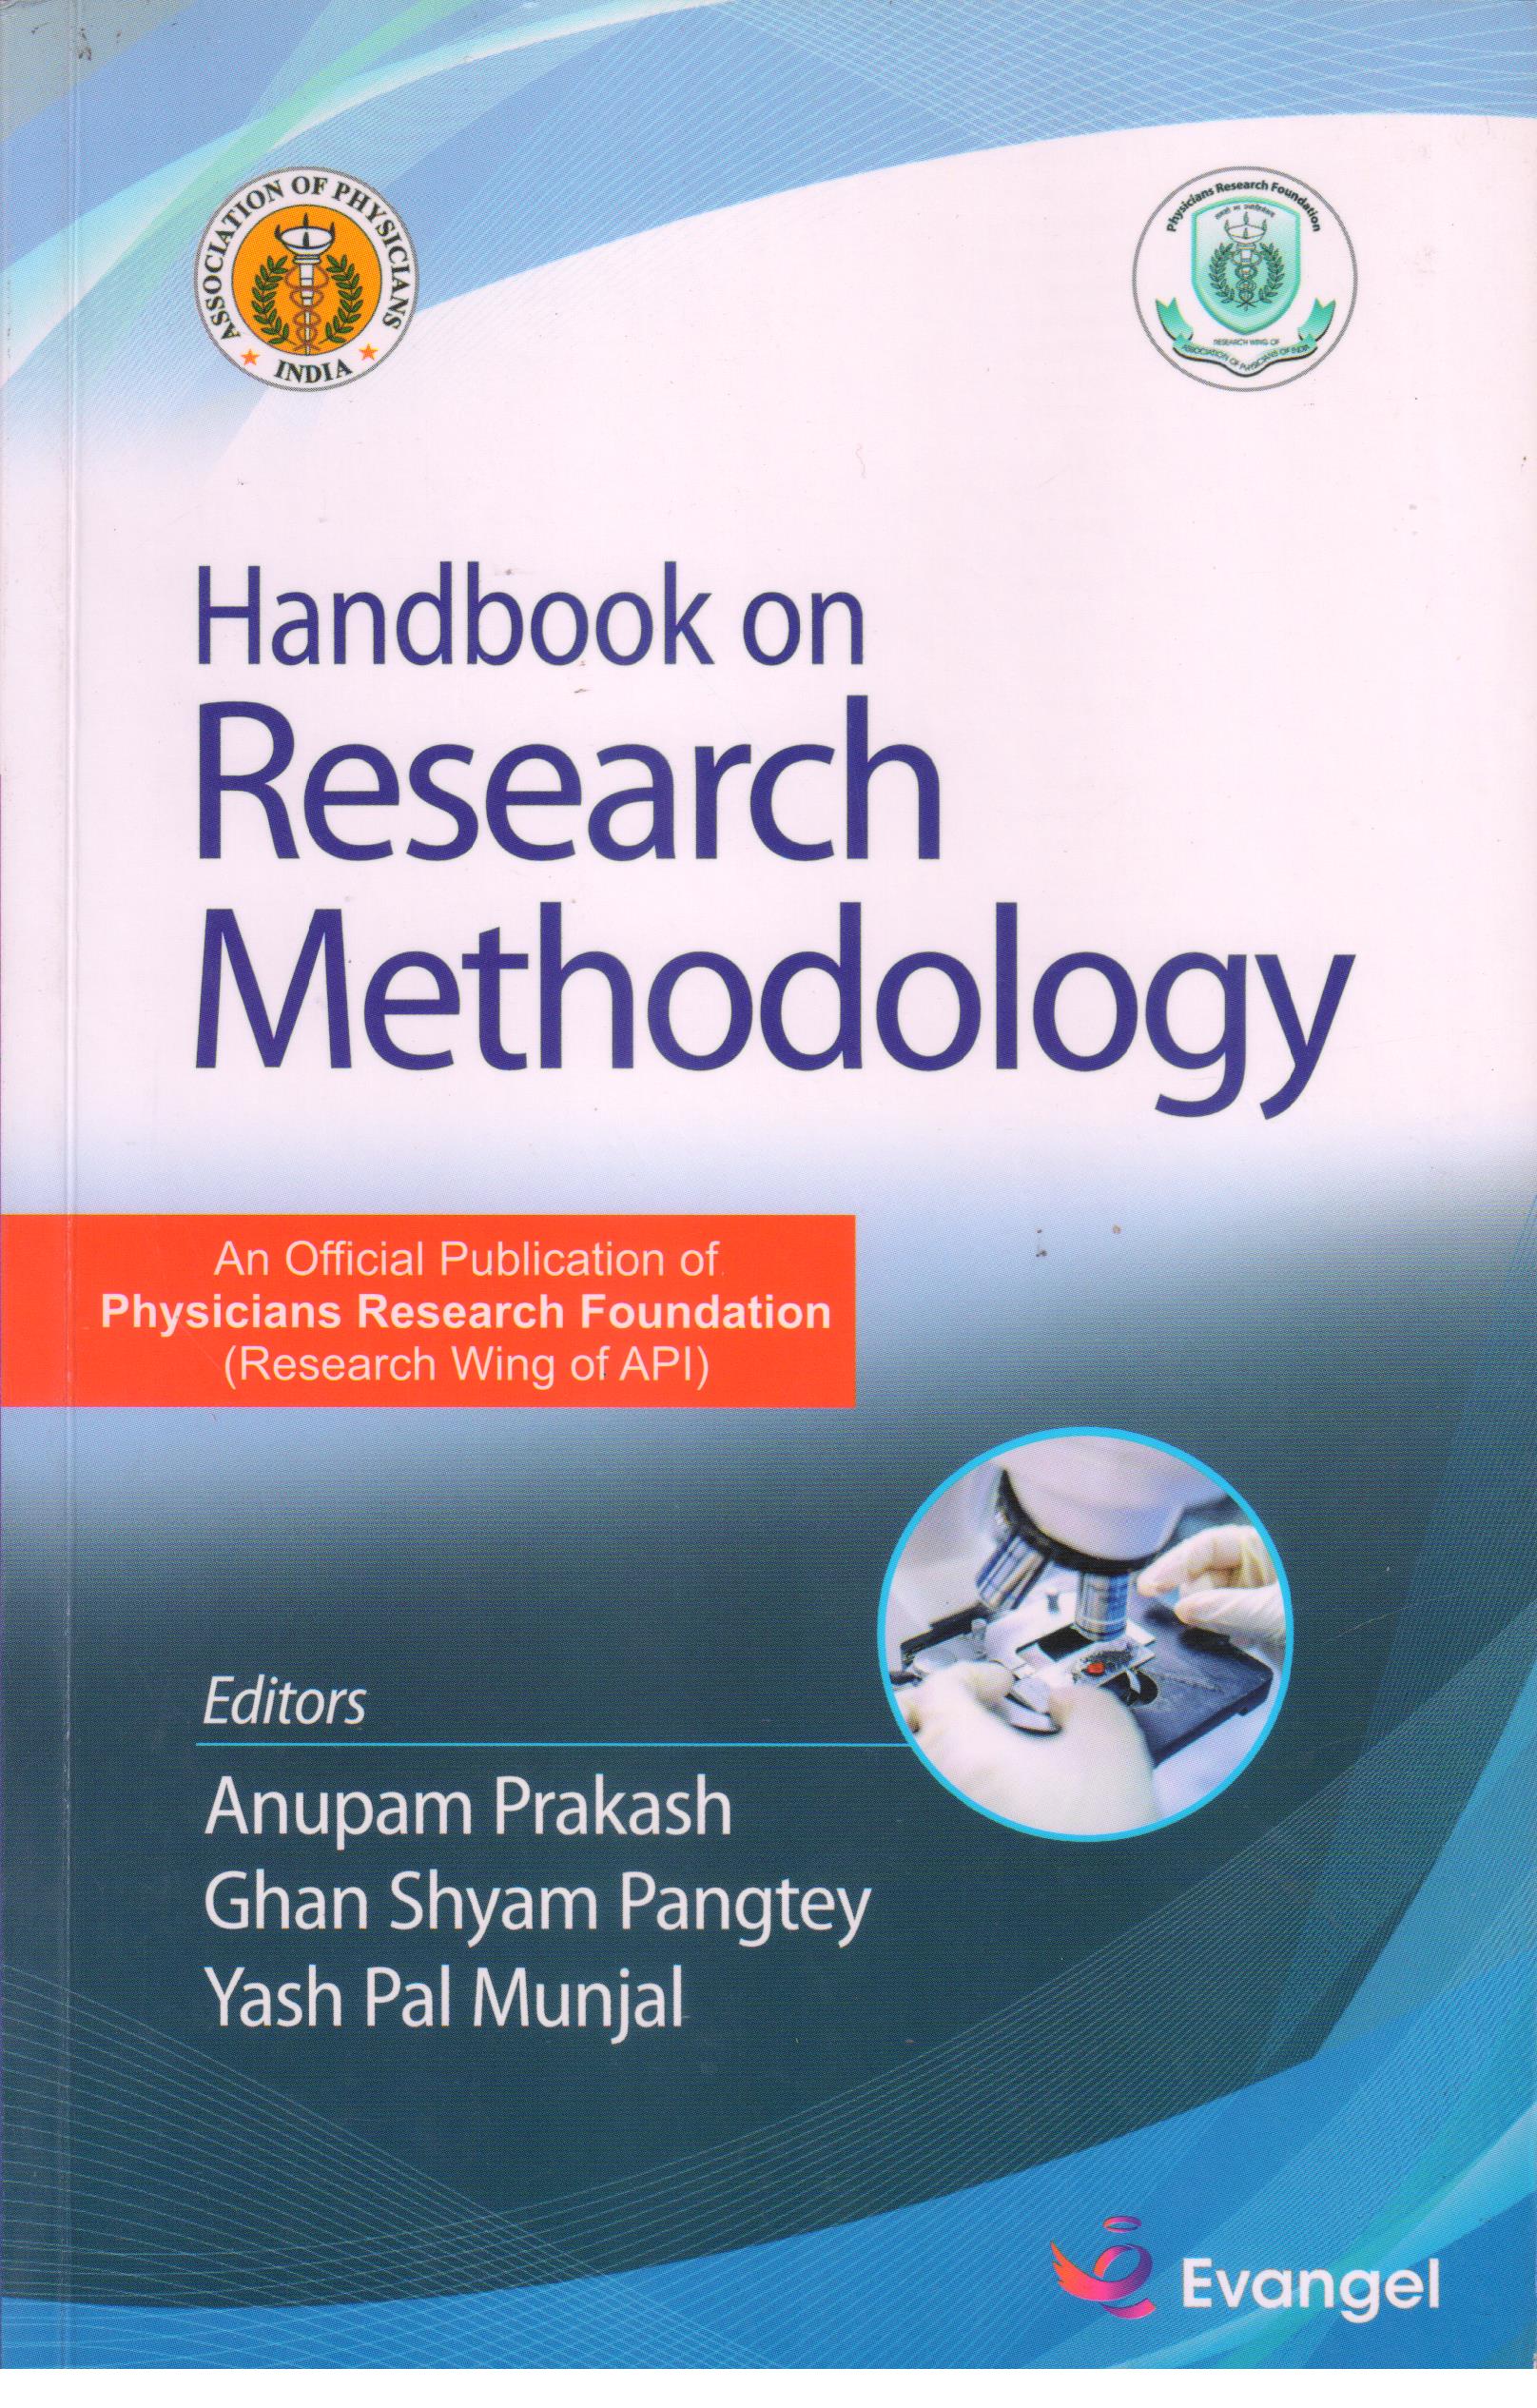 health research methodology books pdf free download